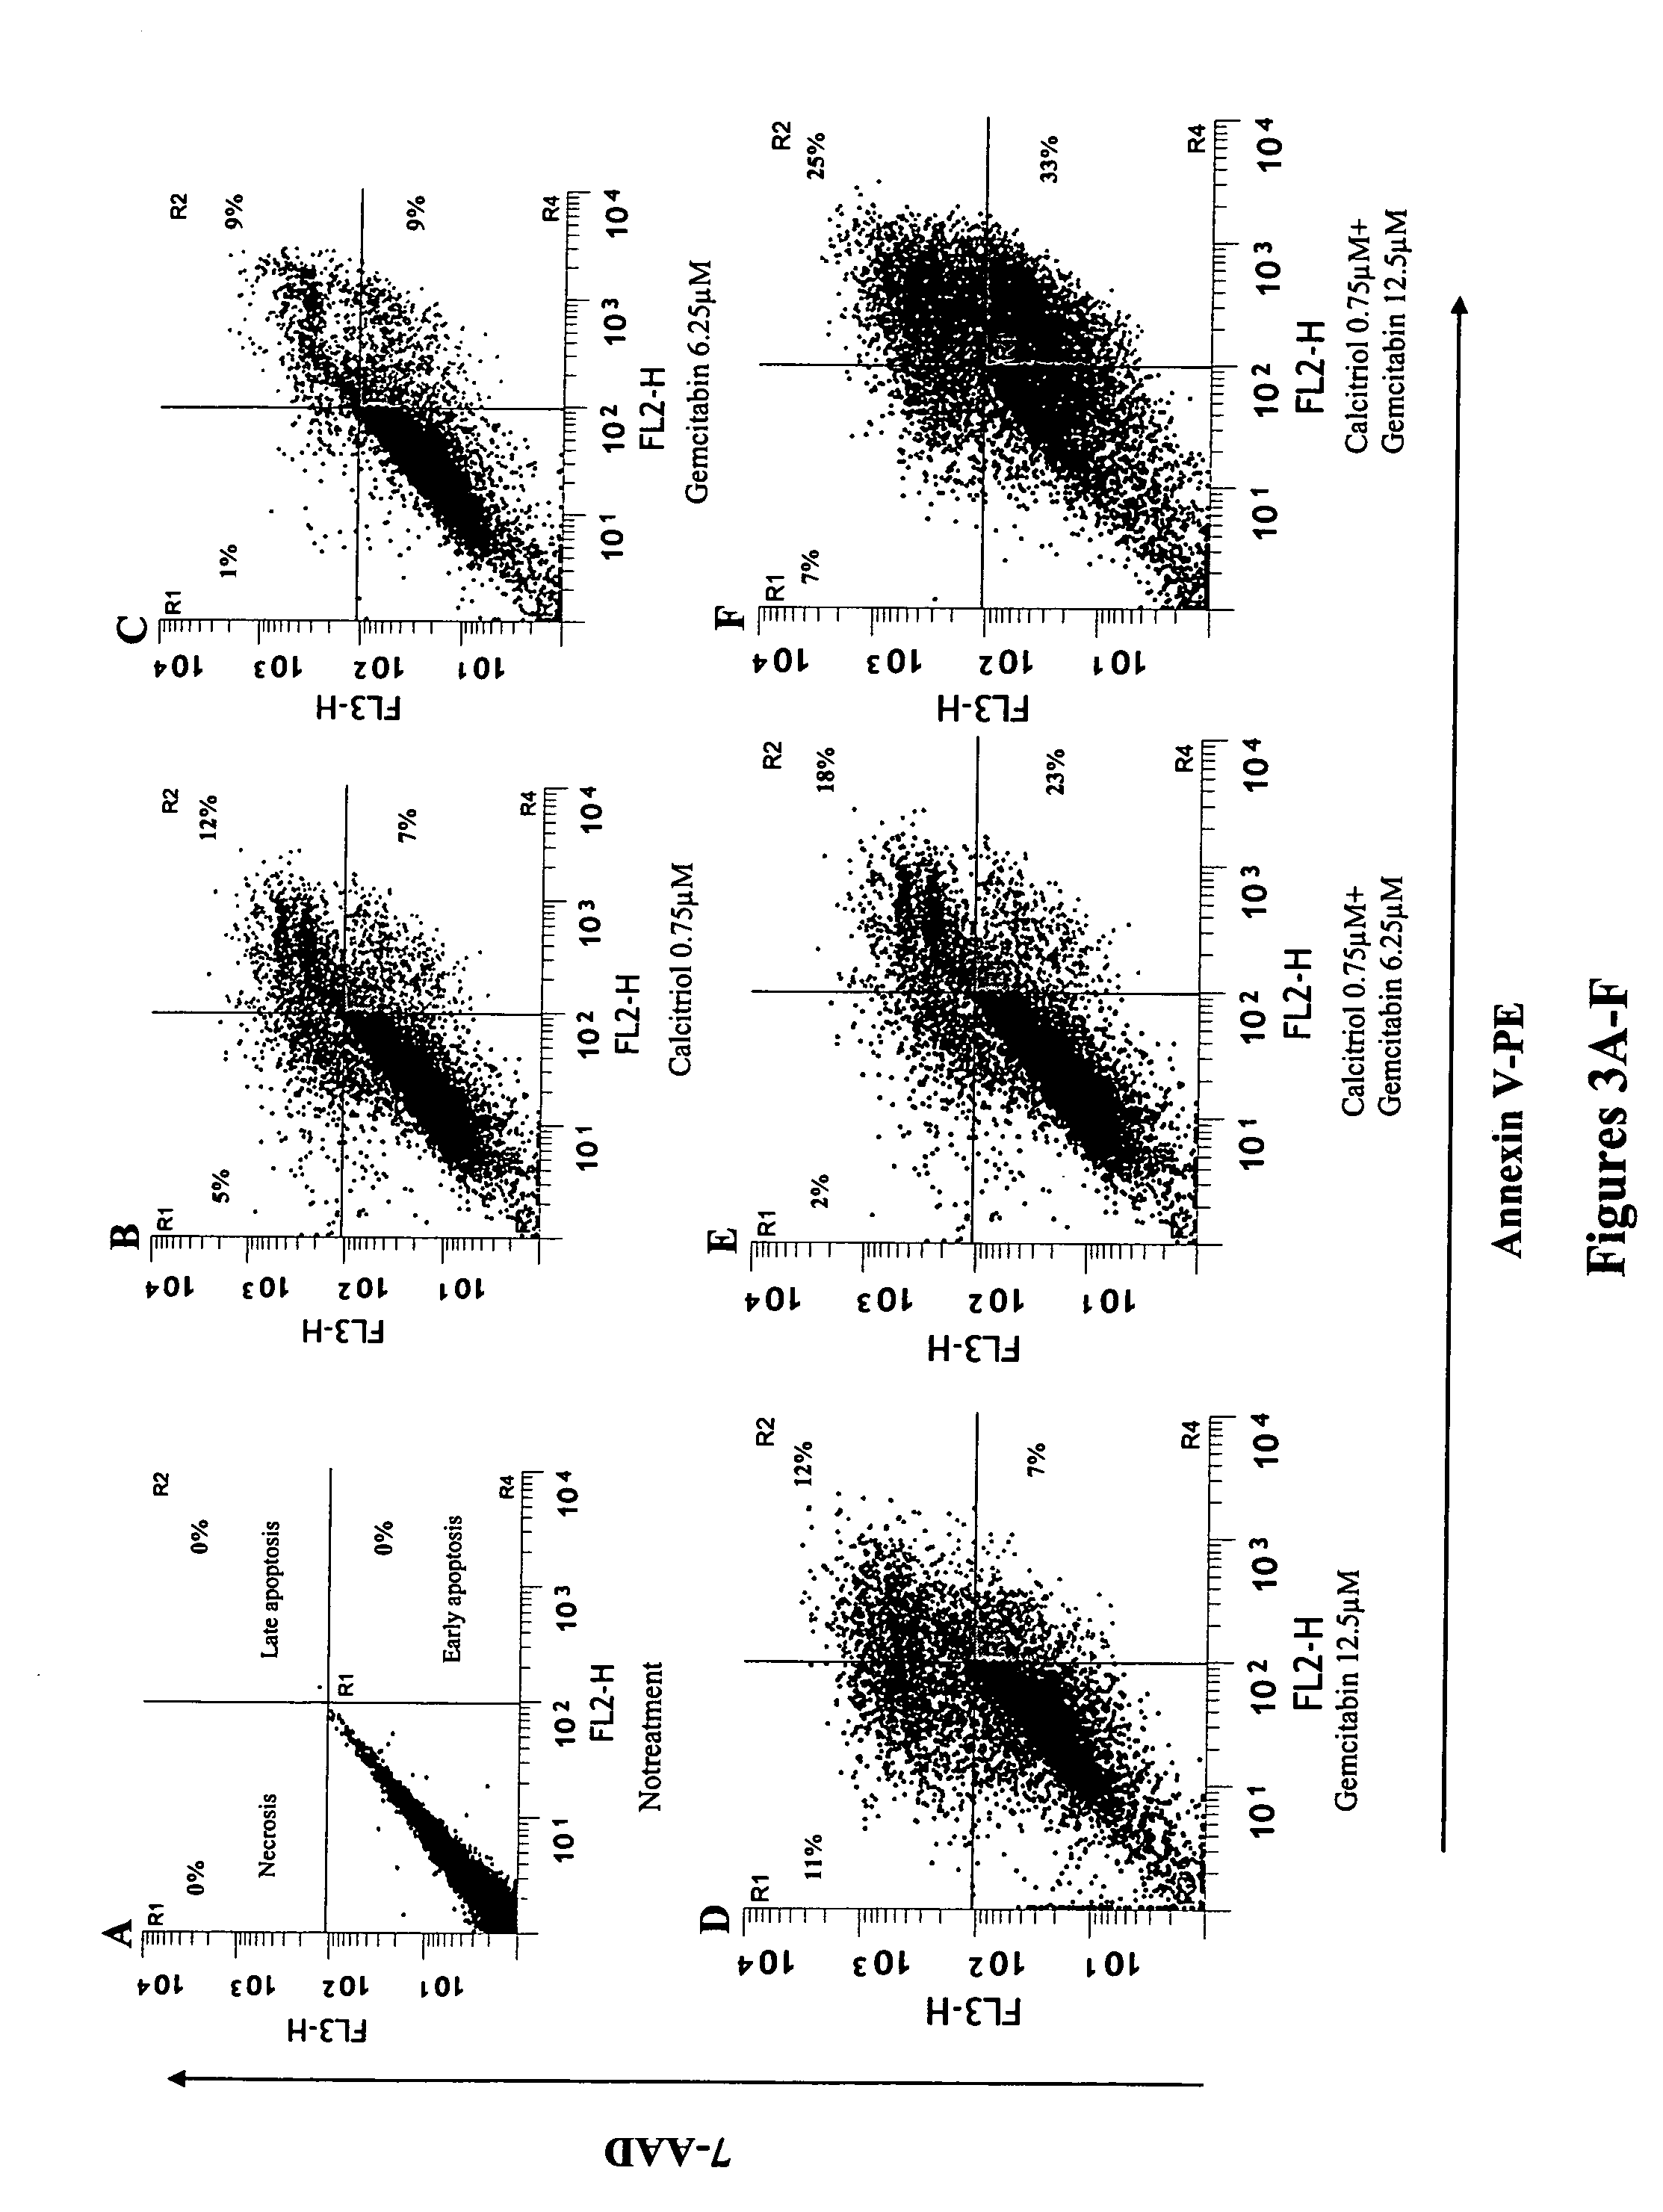 Method of treating solid tumors and leukemias using combination therapy of vitamin D and anti-metabolic nucleoside analogs